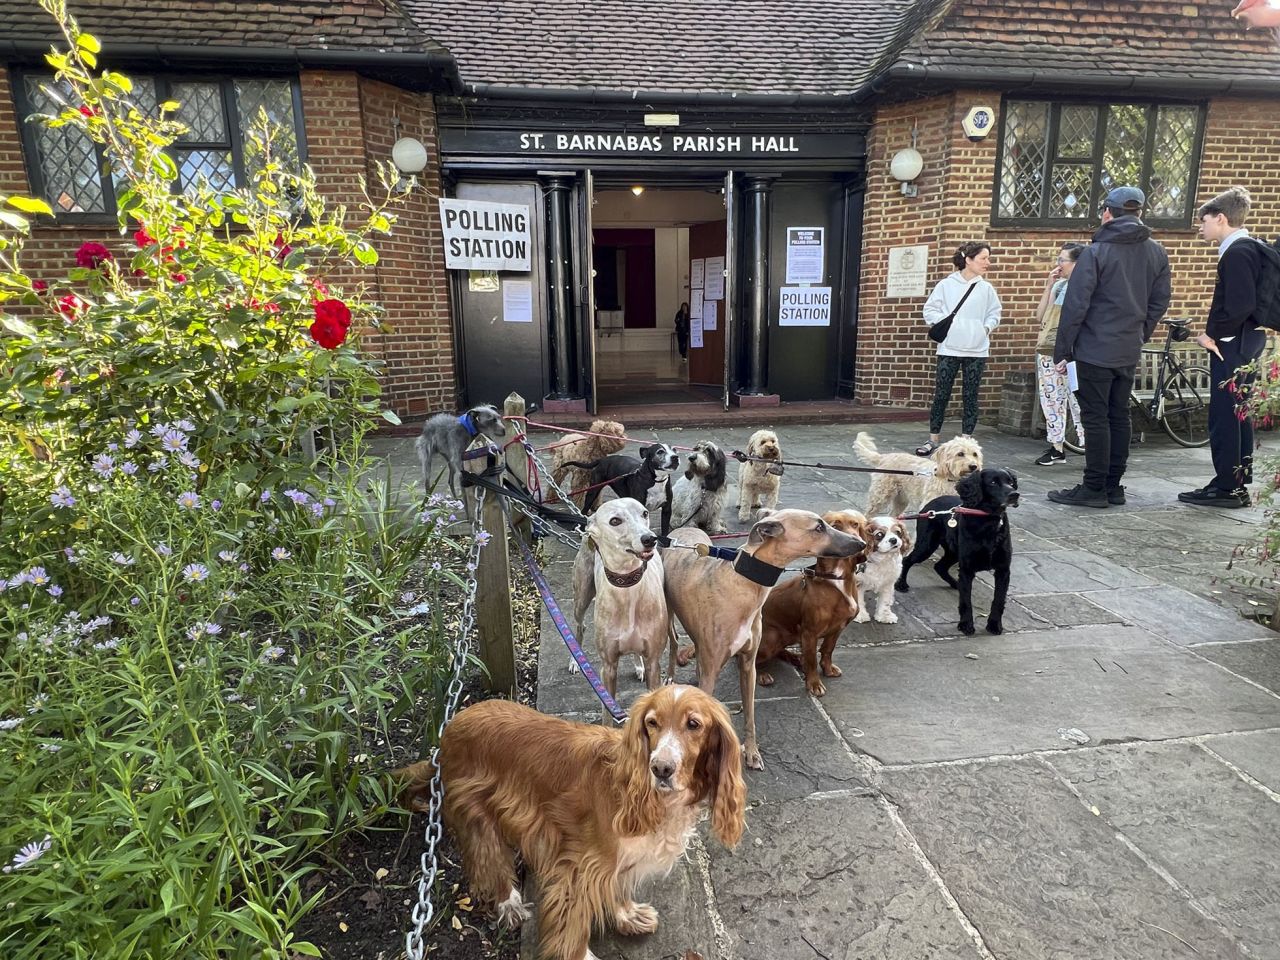 A group of dogs are posed for a photo at a polling station in London.